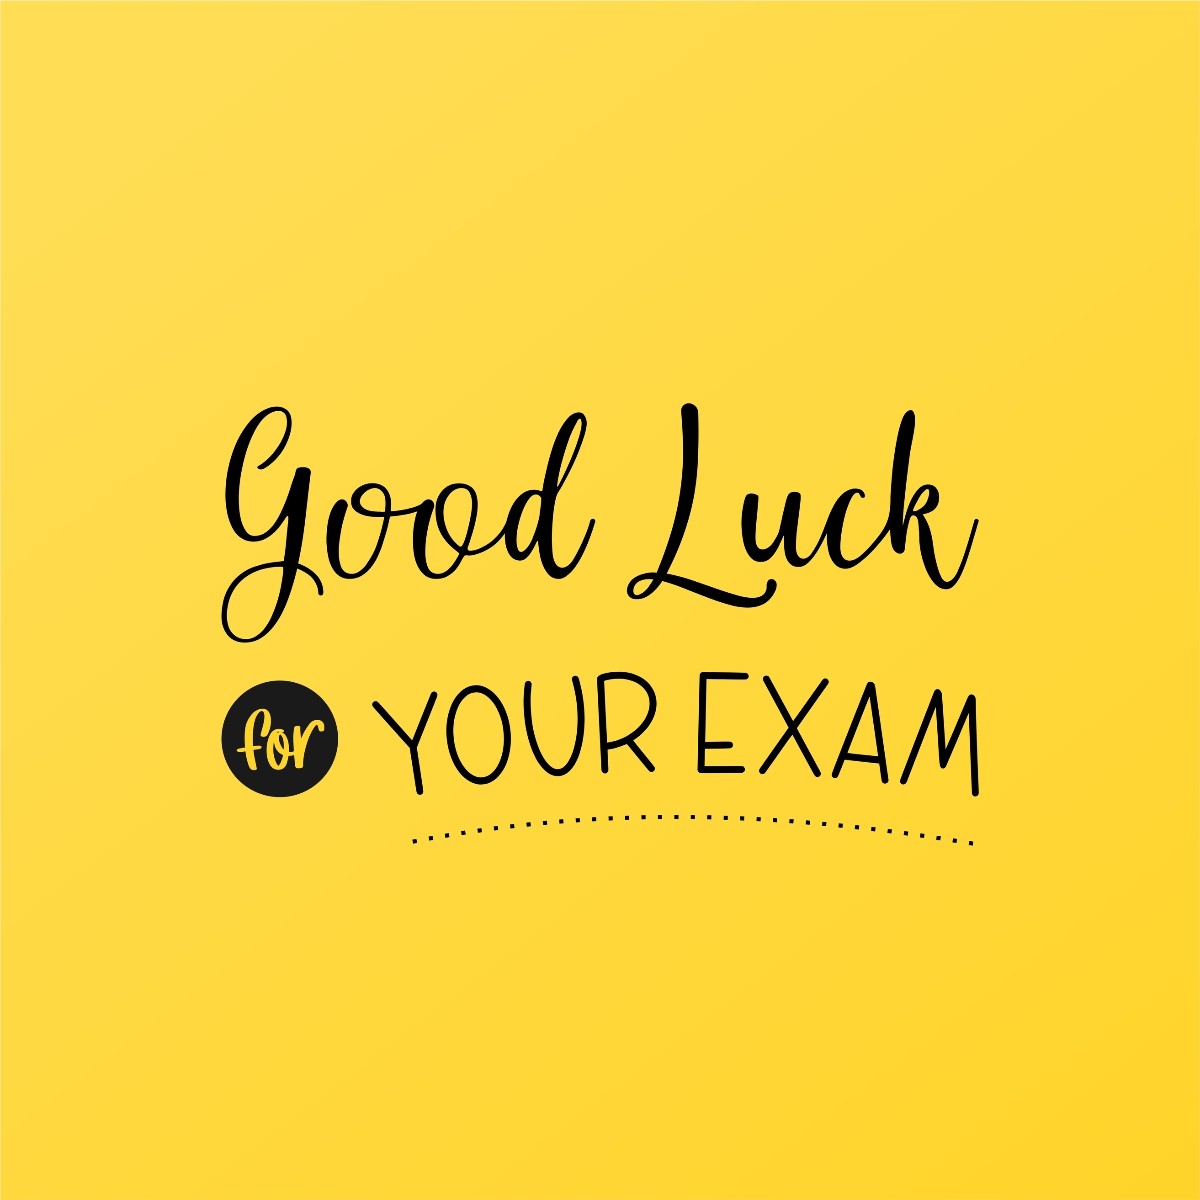 We would like to wish our undergraduate students who are sitting exams this week and next week the best of luck. Remember to stay positive, stay focused, and give it your all - you can do it! 👏